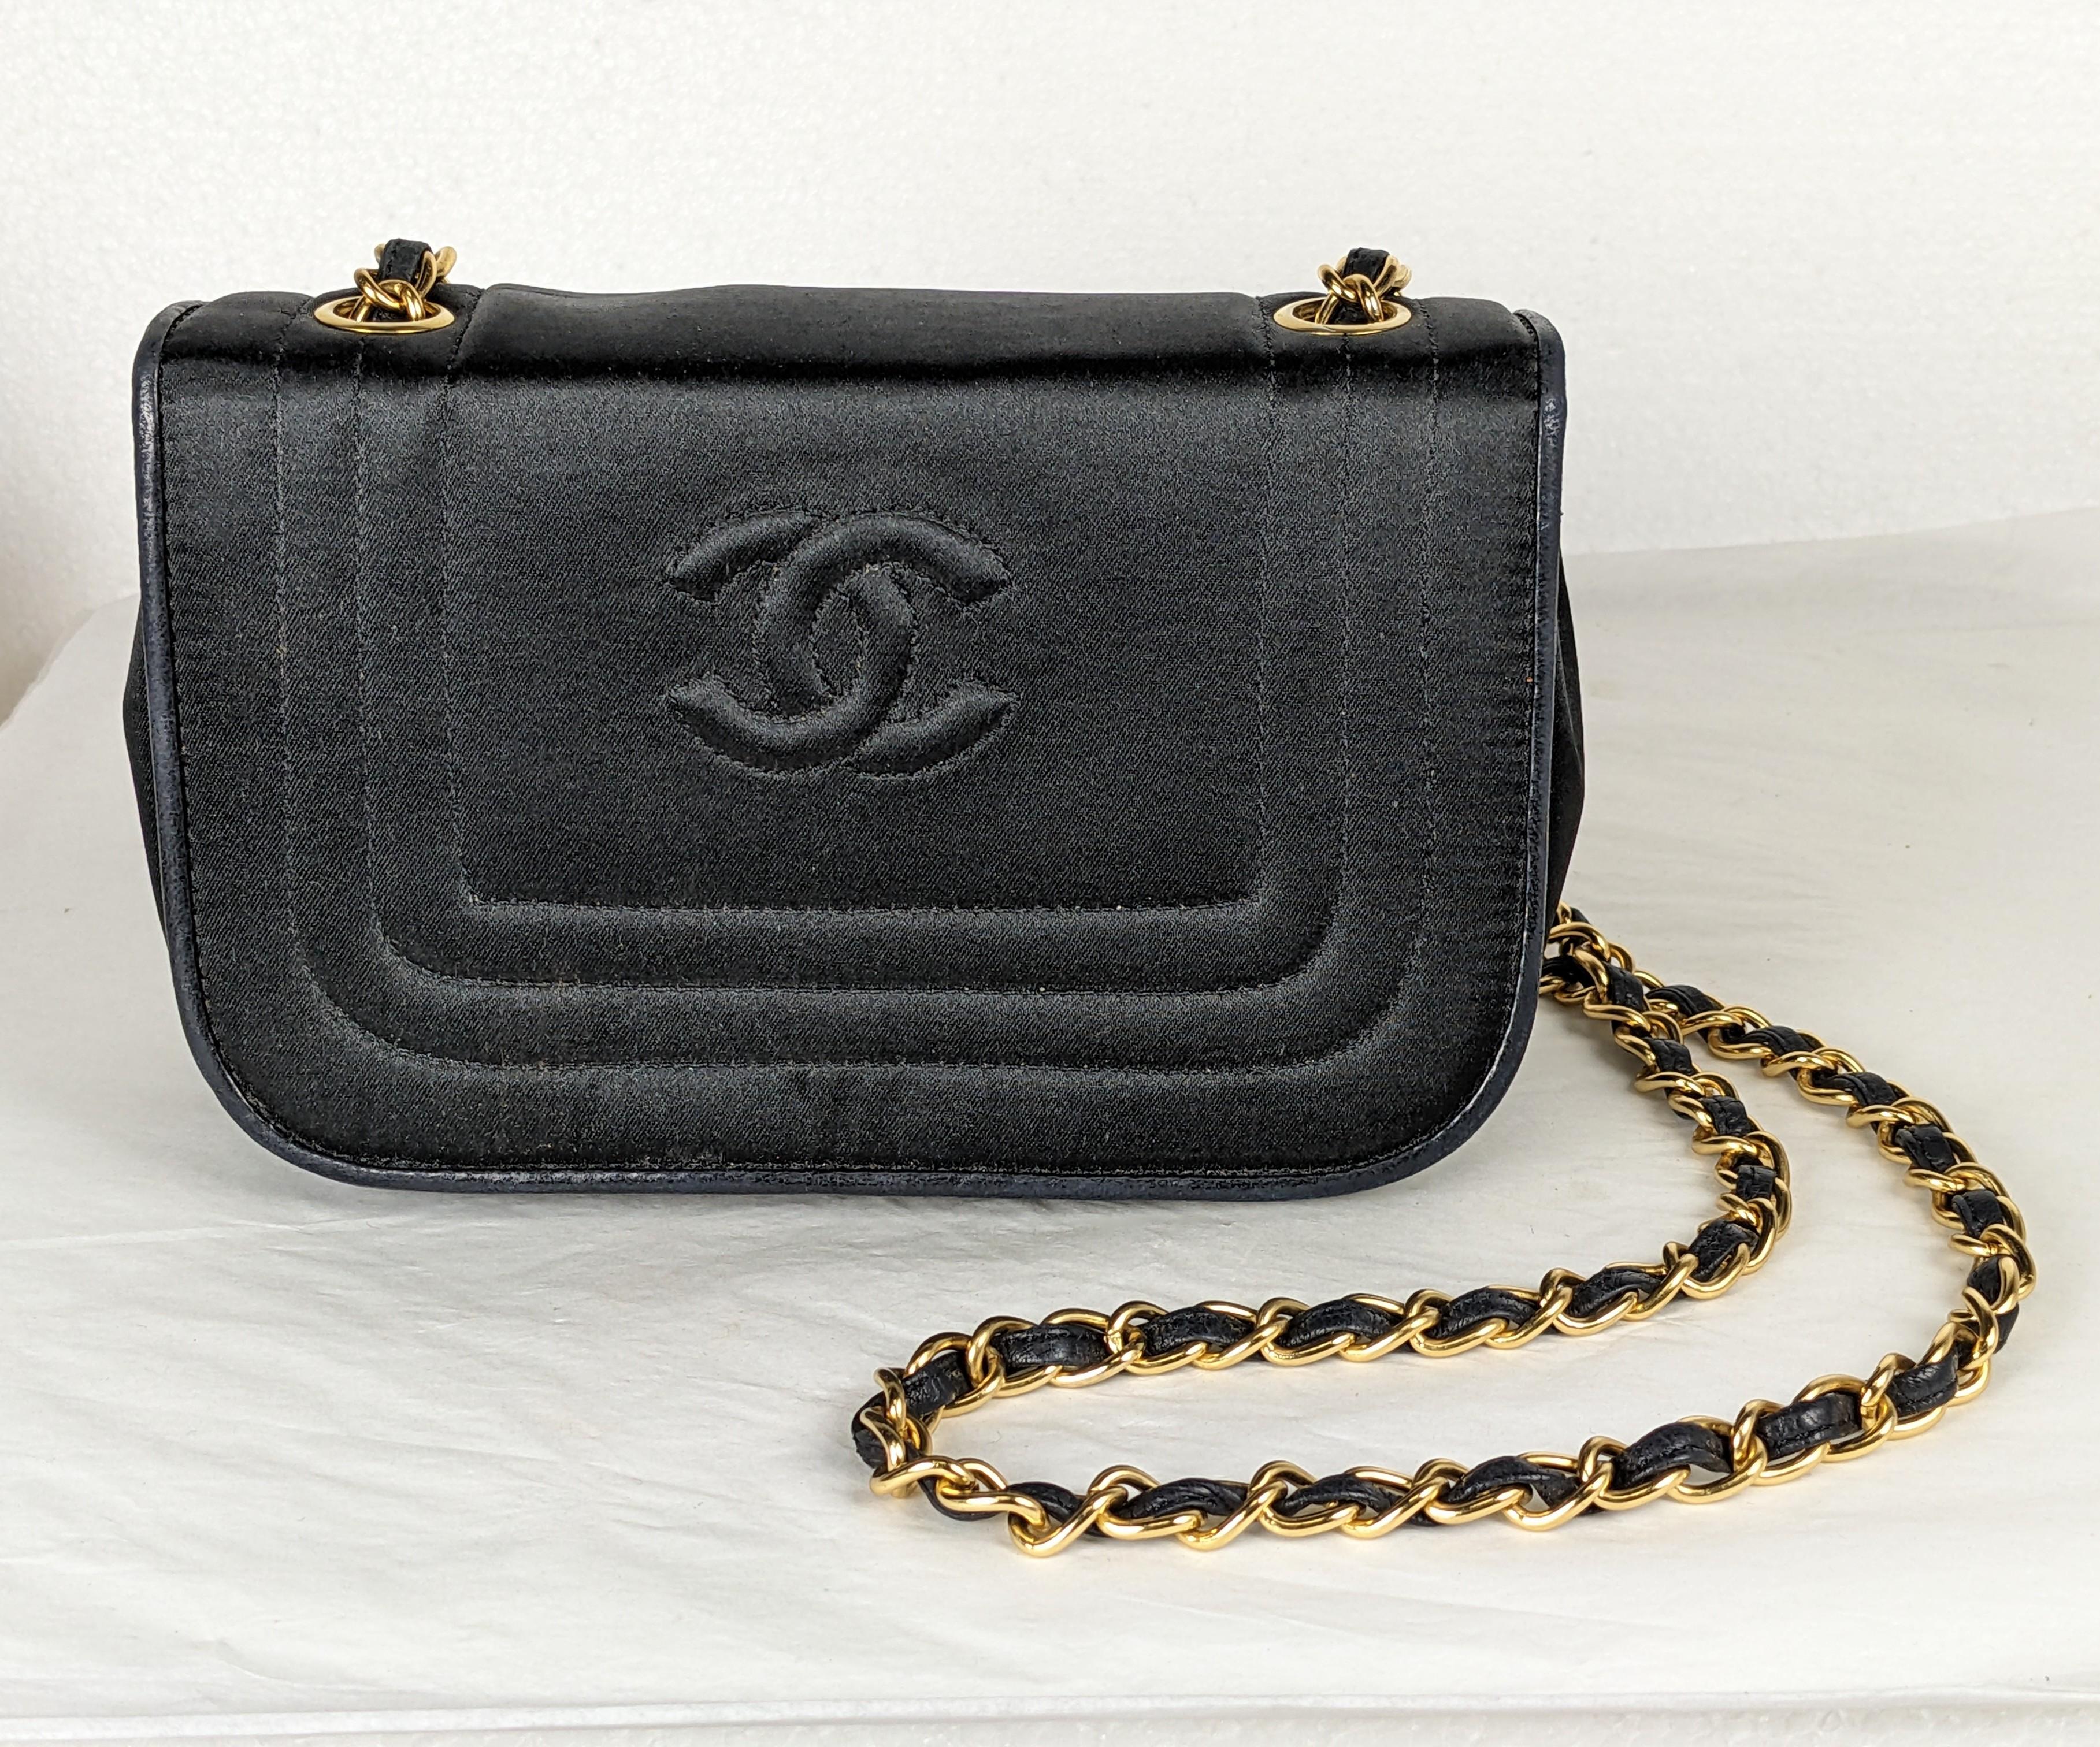 Timeless and Chic Chanel Satin and Calfskin Mini Shoulder Bag circa 1990's. Black silk satin quilted and logo'd with leather piping and lining. One zip interior pocket. Long leather and gilt bronze crossbody chain strap. Authentic Chanel bag,